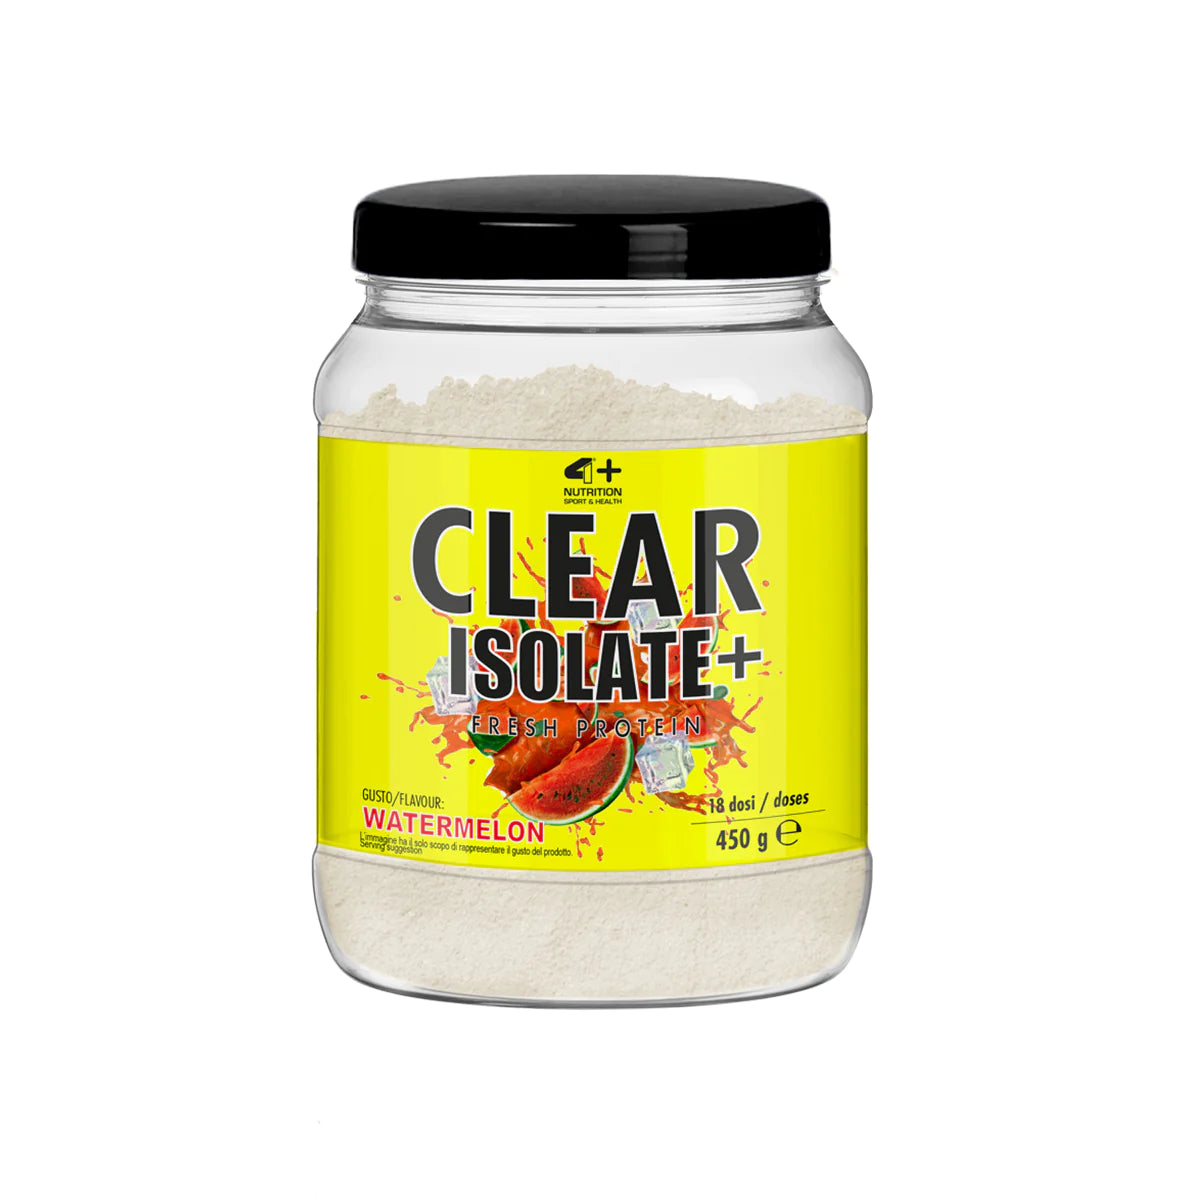 4+ Nutrition - Clear Isolate+ (Fresh Protein)